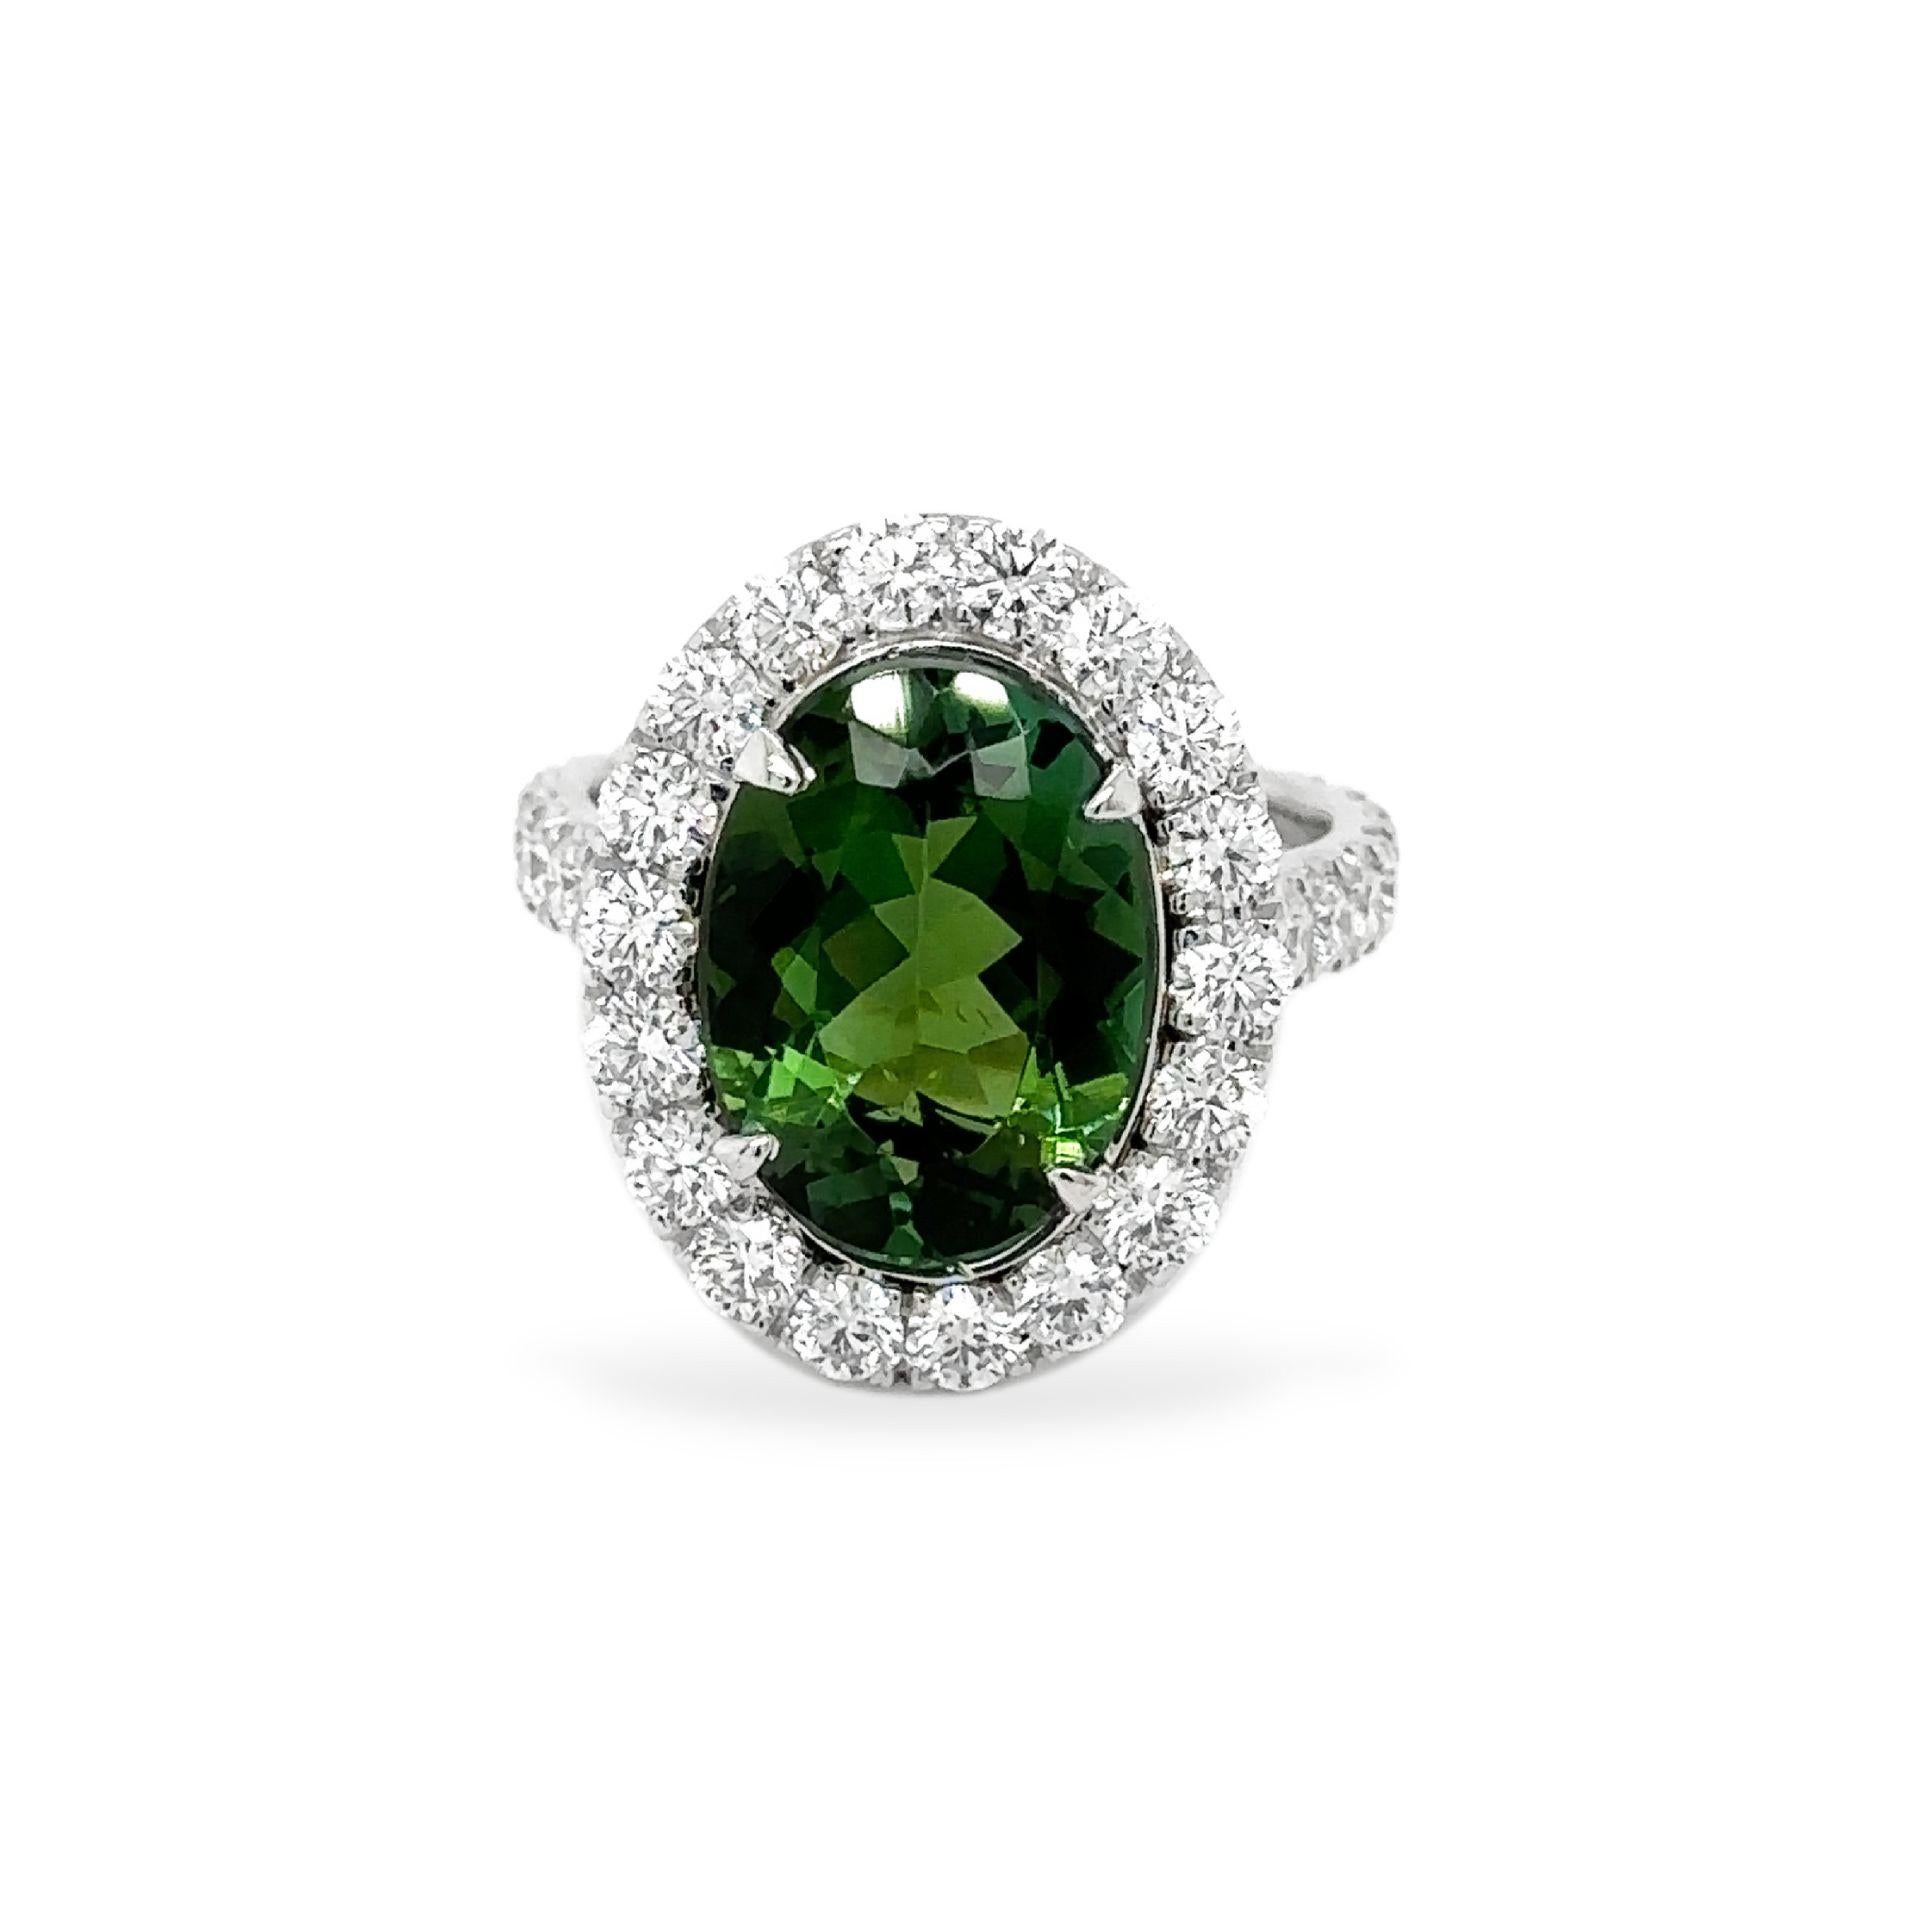 Oval Green Tourmaline Diamond Ring 4.72 carats 

Green Color

Spectacular. Set in Platinum

Stunning!

Oval Tourmaline weighs 4.72 carats. 

Small Round Diamond 2.36 carats DEF Color VVS/VS Clarity

TOTAL CARAT WEIGHT of 7.08 CARATS

Set in